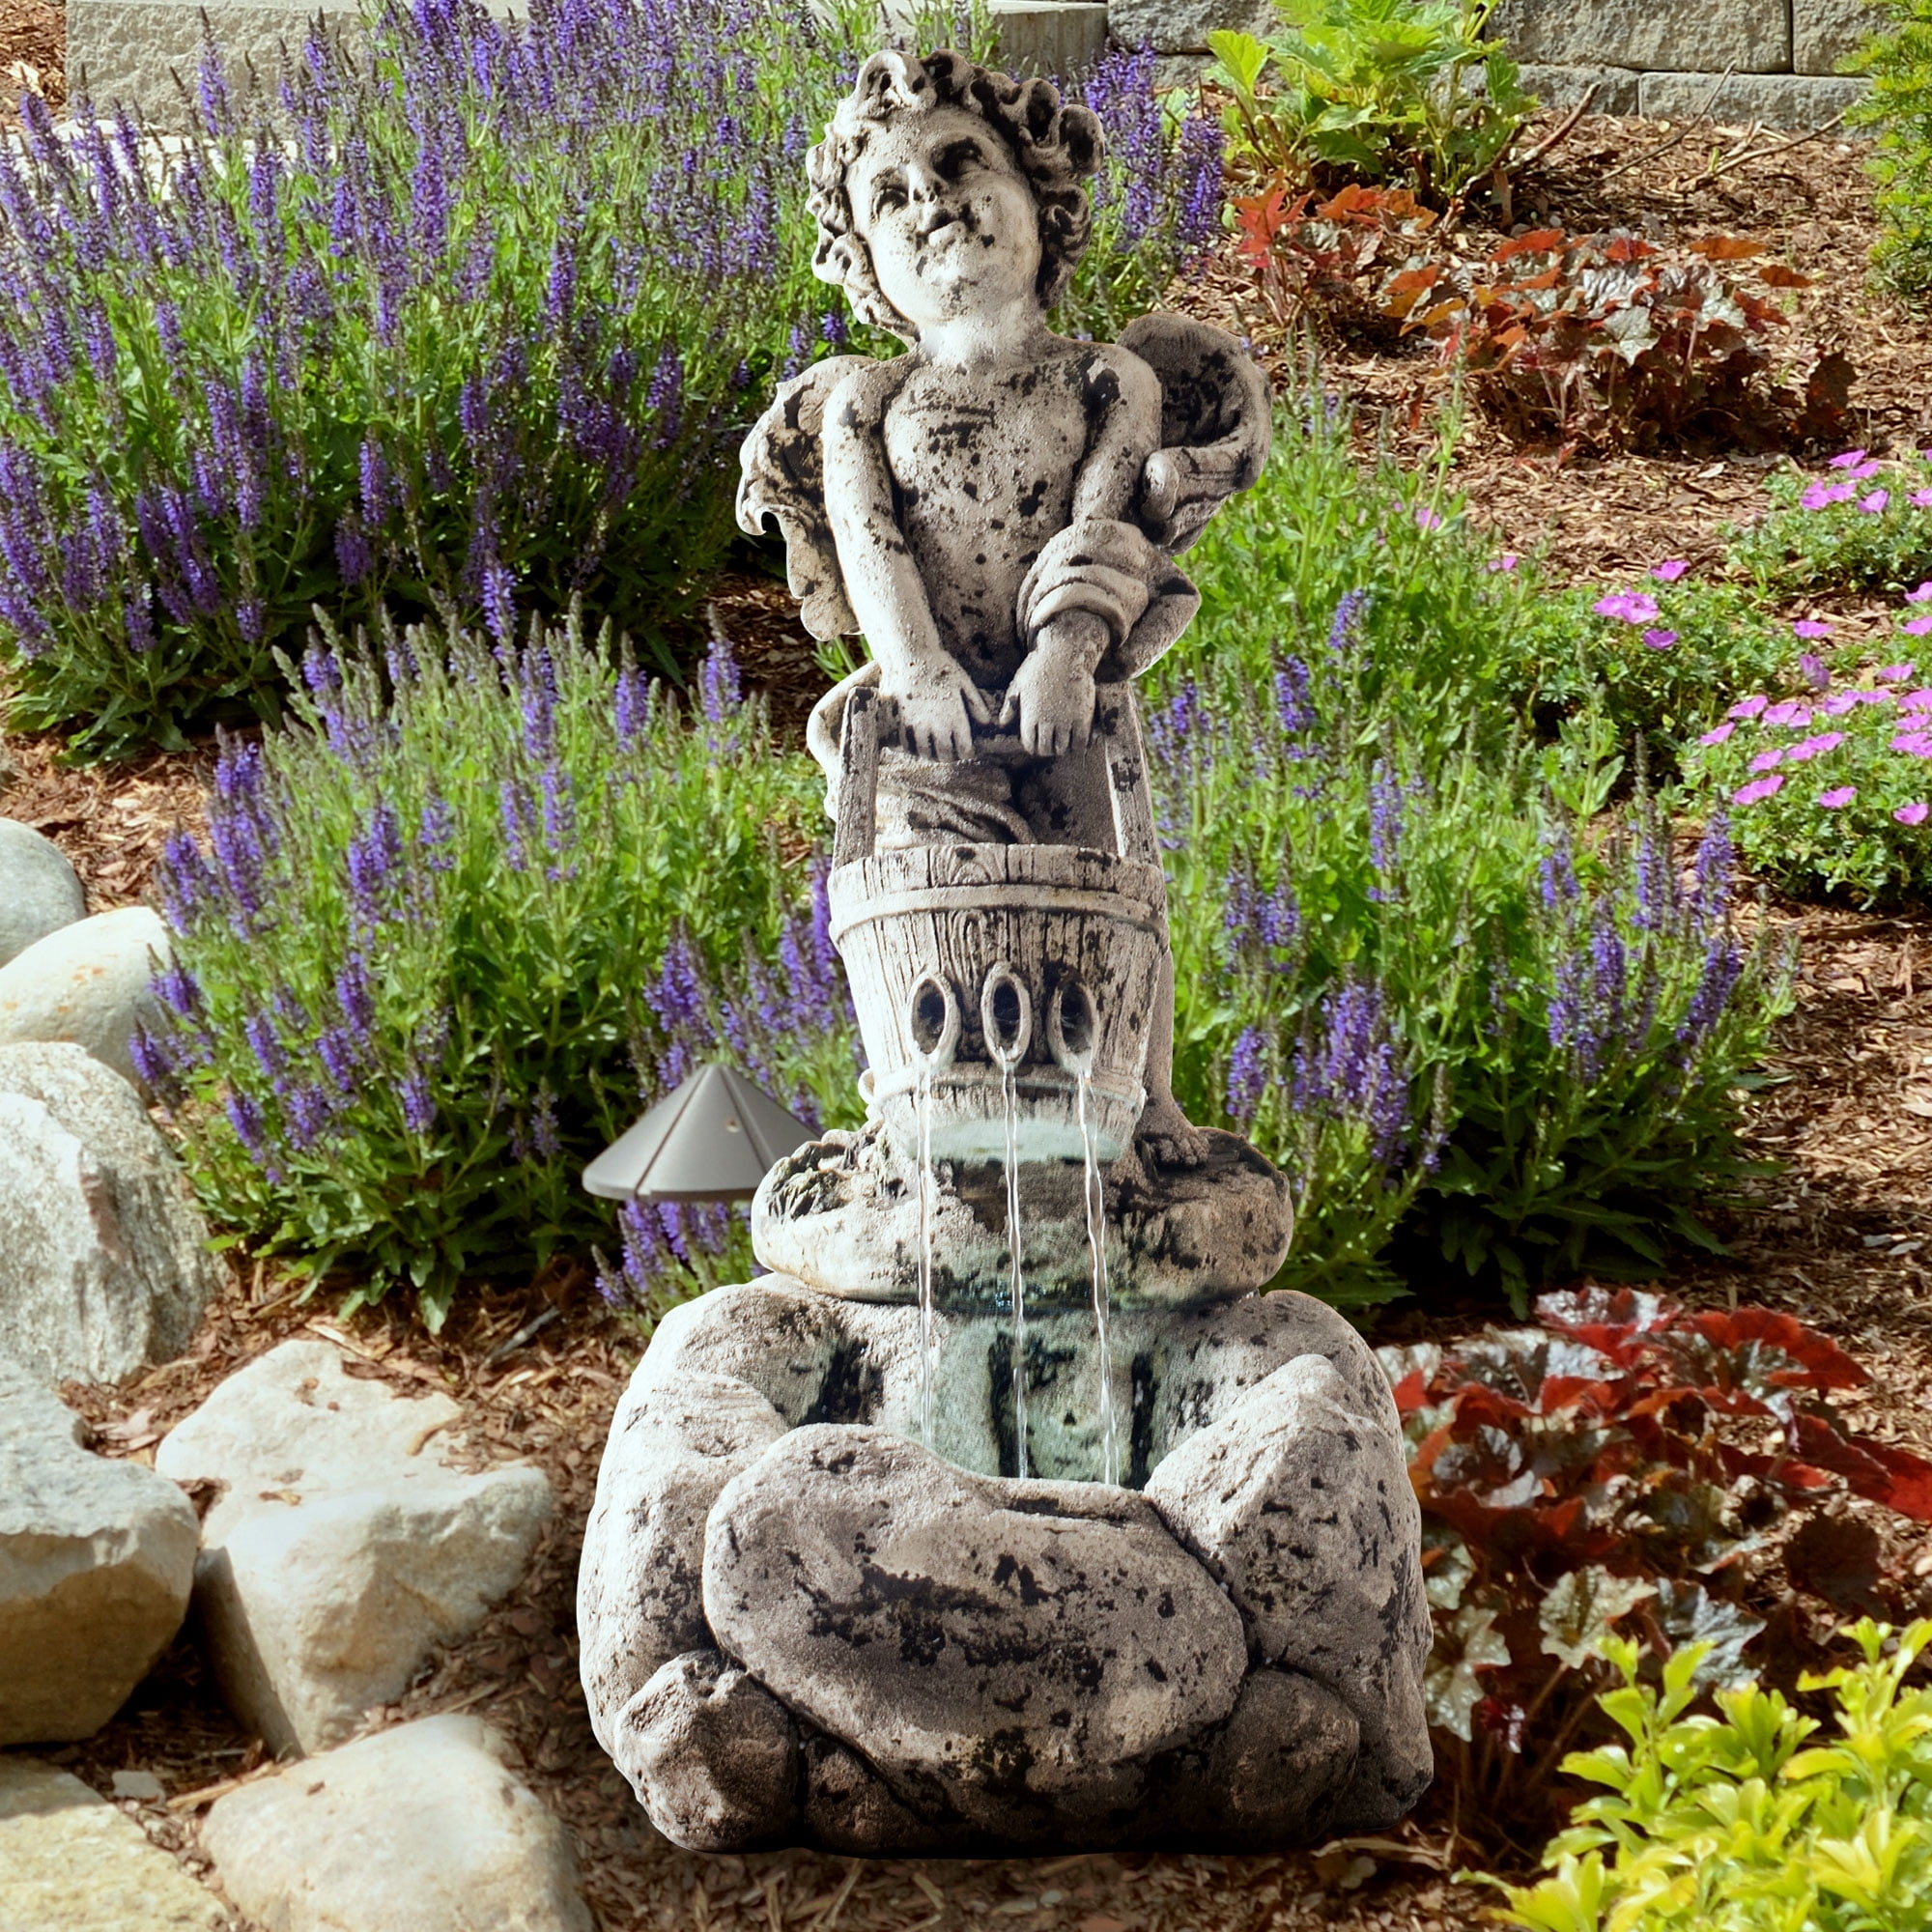 Pure Garden Outdoor Water Fountain With LED Lights, Lighted Cherub Angel  Fountain With Antique Stone Design for Decor on Patio, Lawn and Garden 